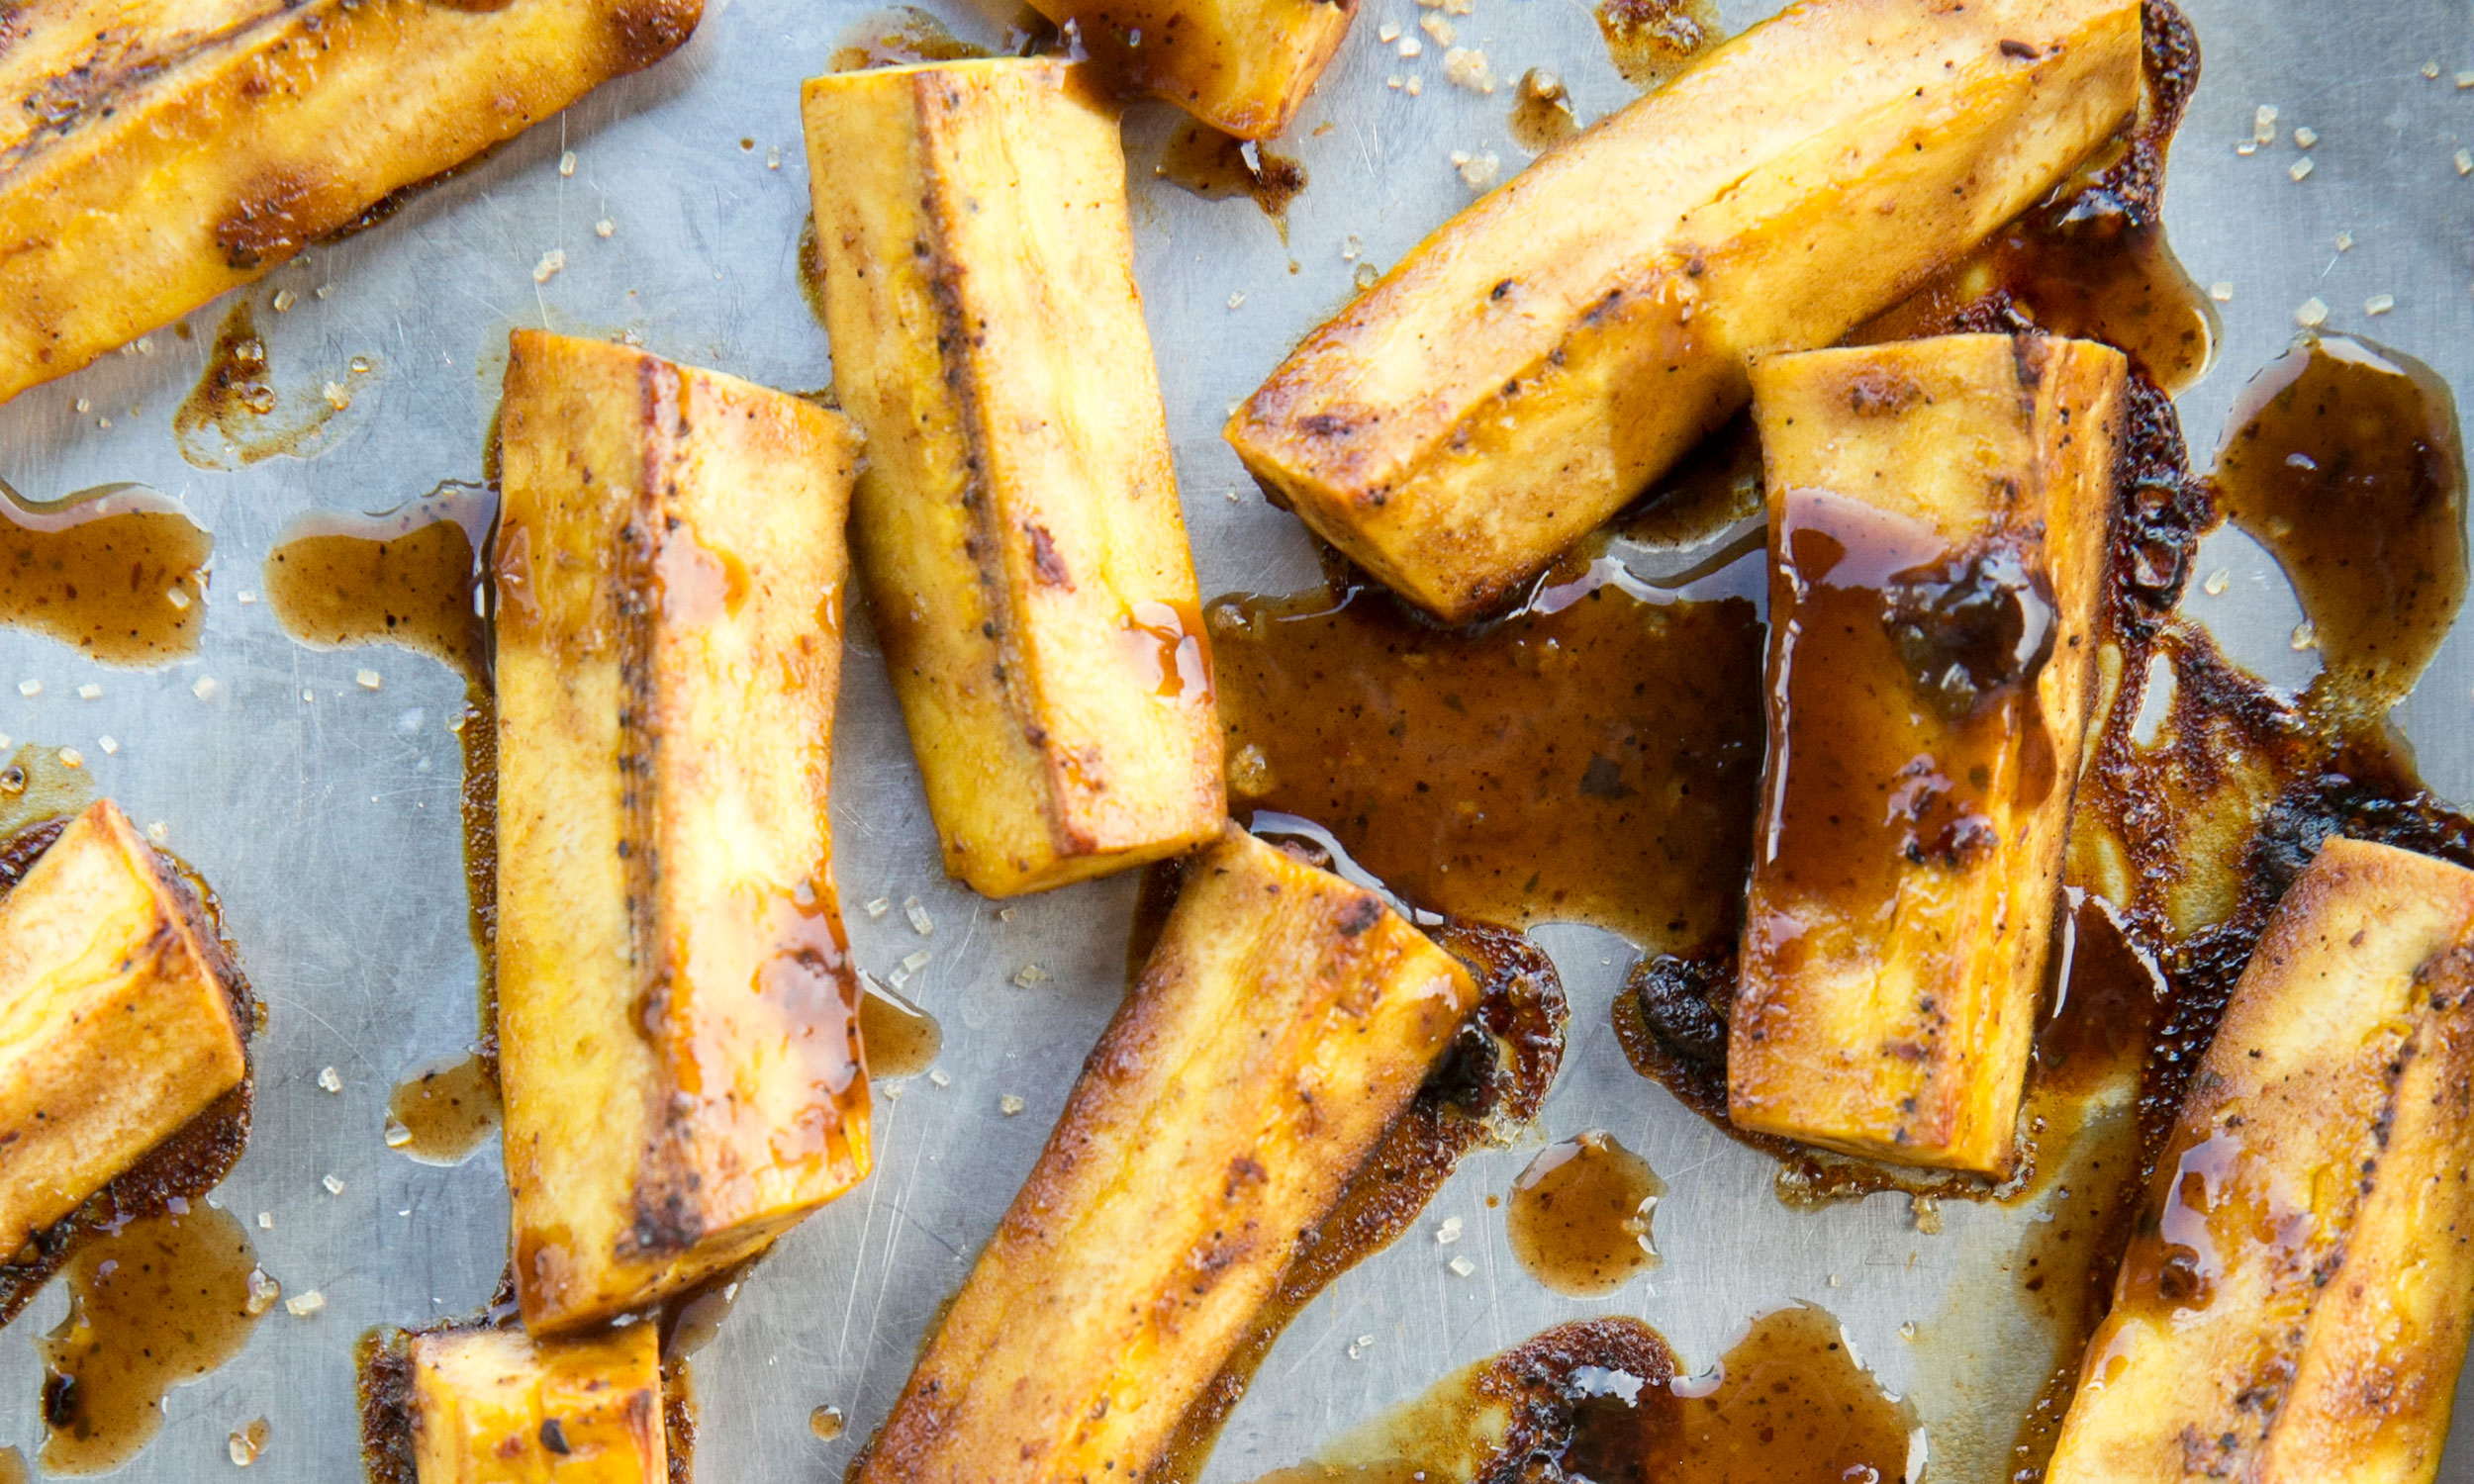 Eat Roasted Plantain Like French Fries